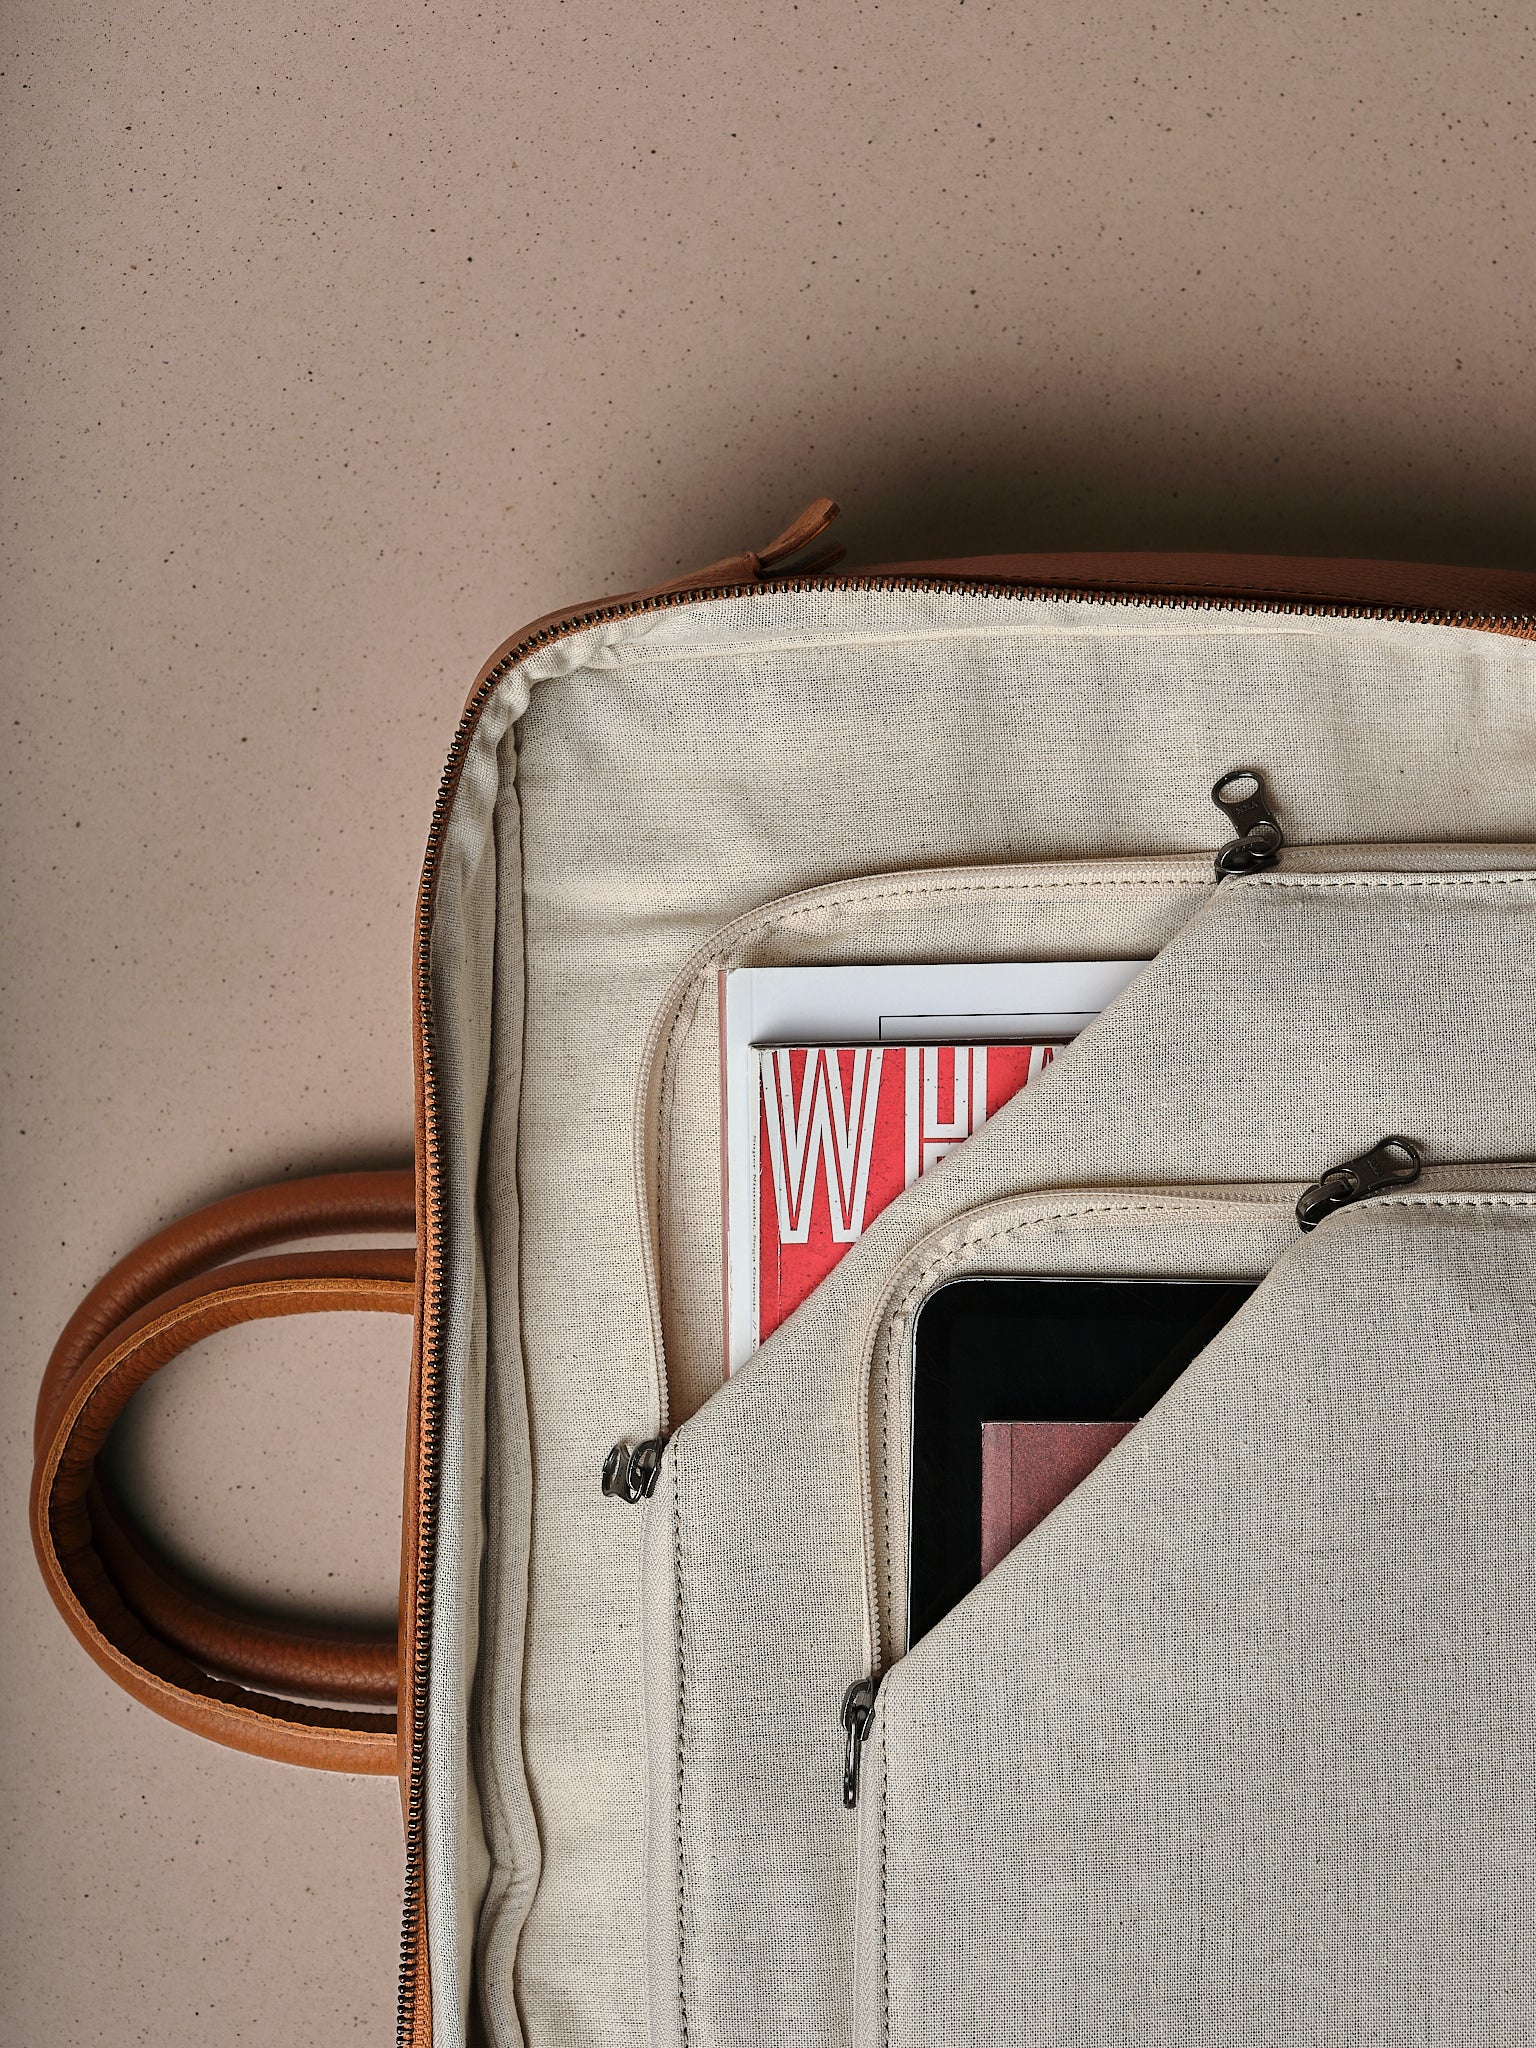 Laptop pocket. Linen interior. Briefcase Backpack Combination Tan by Capra Leather